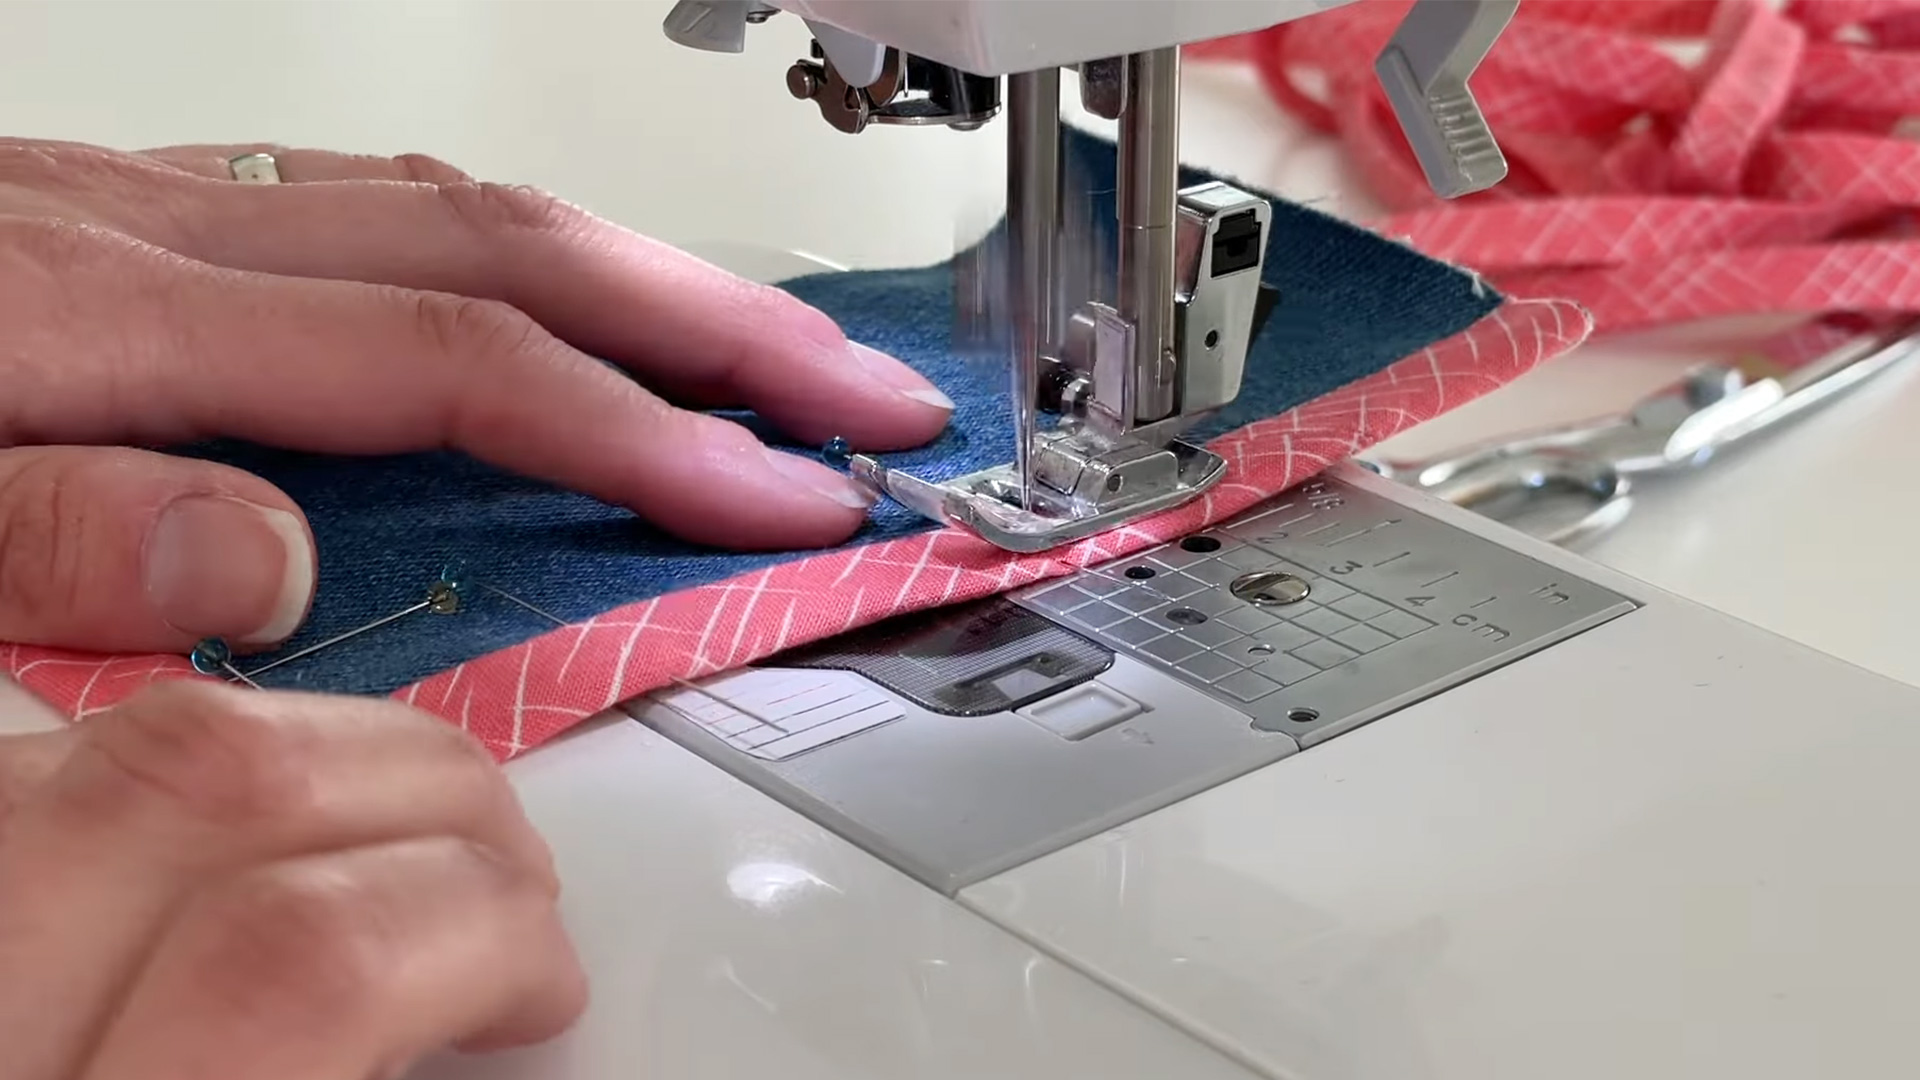 CUTTING TOOLS for Sewing - Best Tools You Need